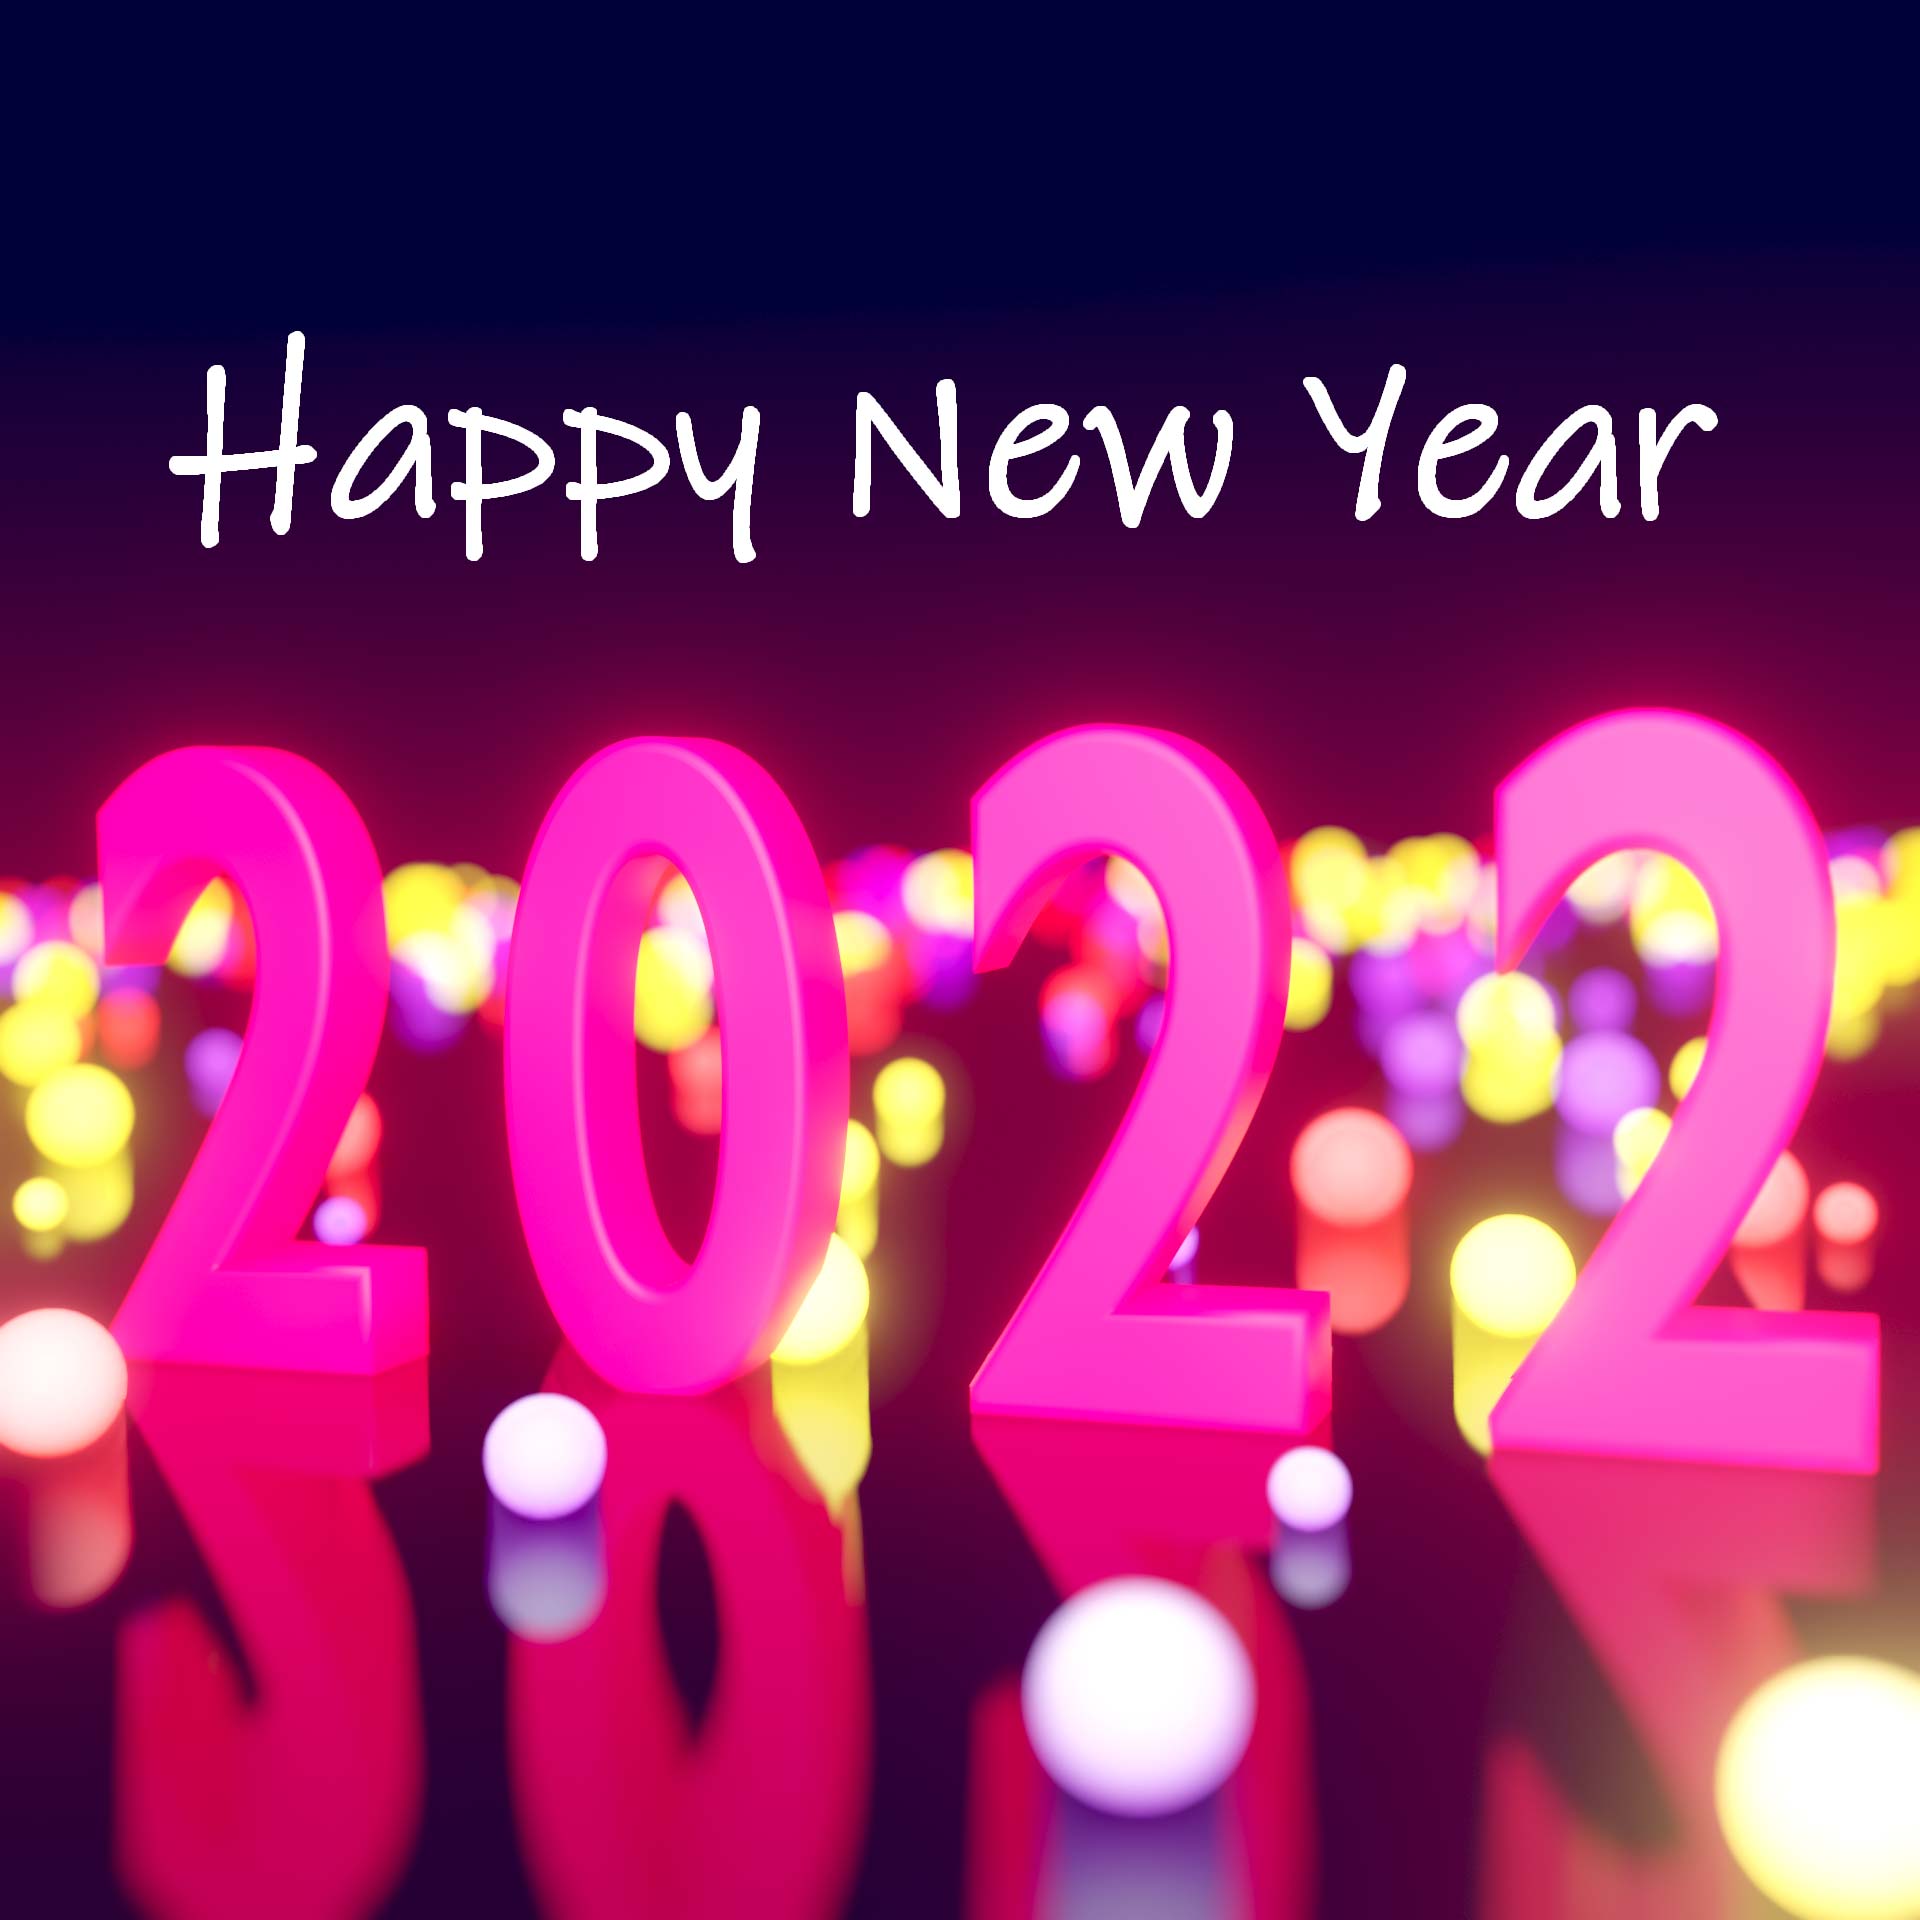 New Year 2022 wishes Photo Free Download